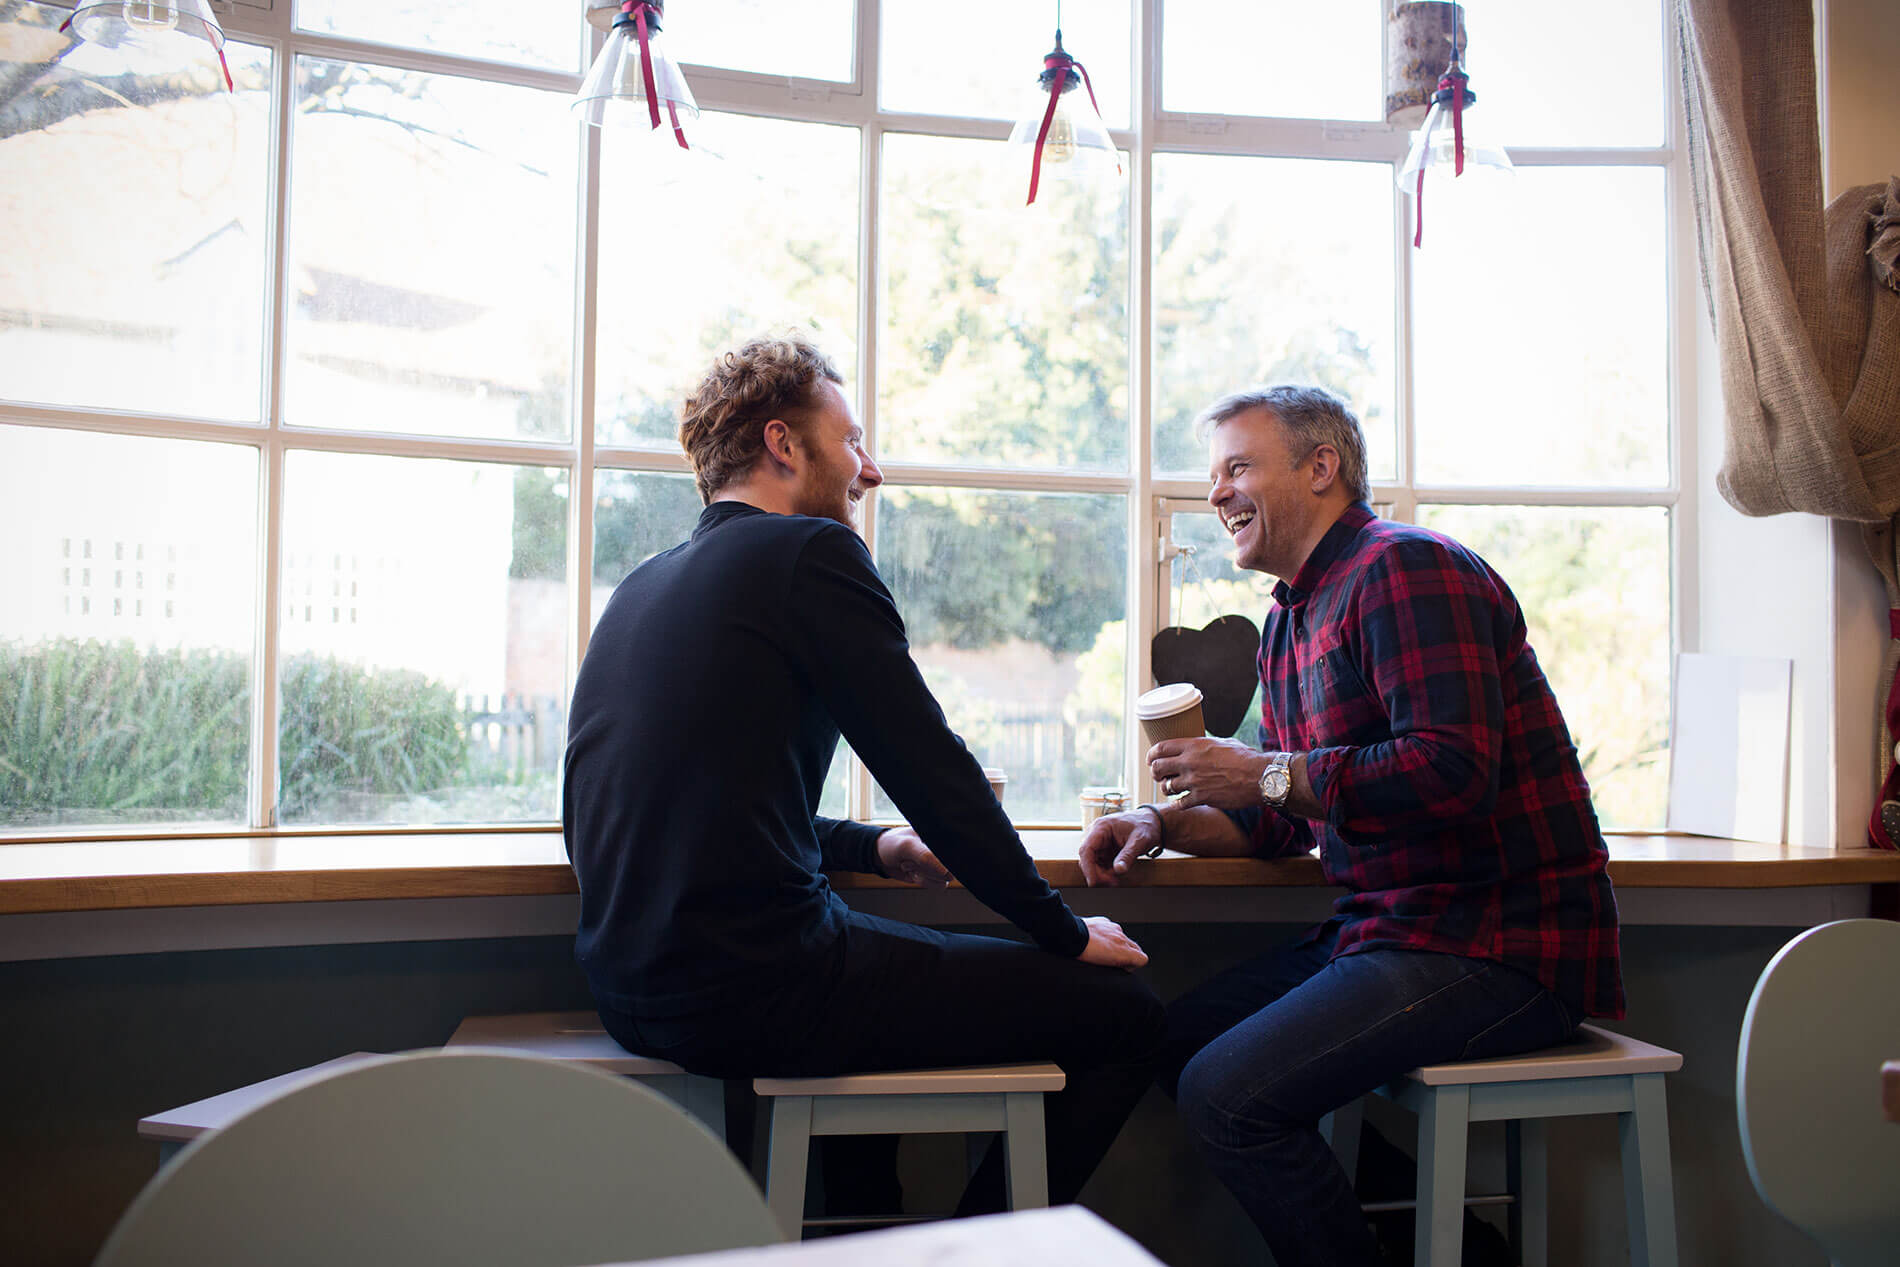 Two men having a conversation and laughing together at a café table by the window.